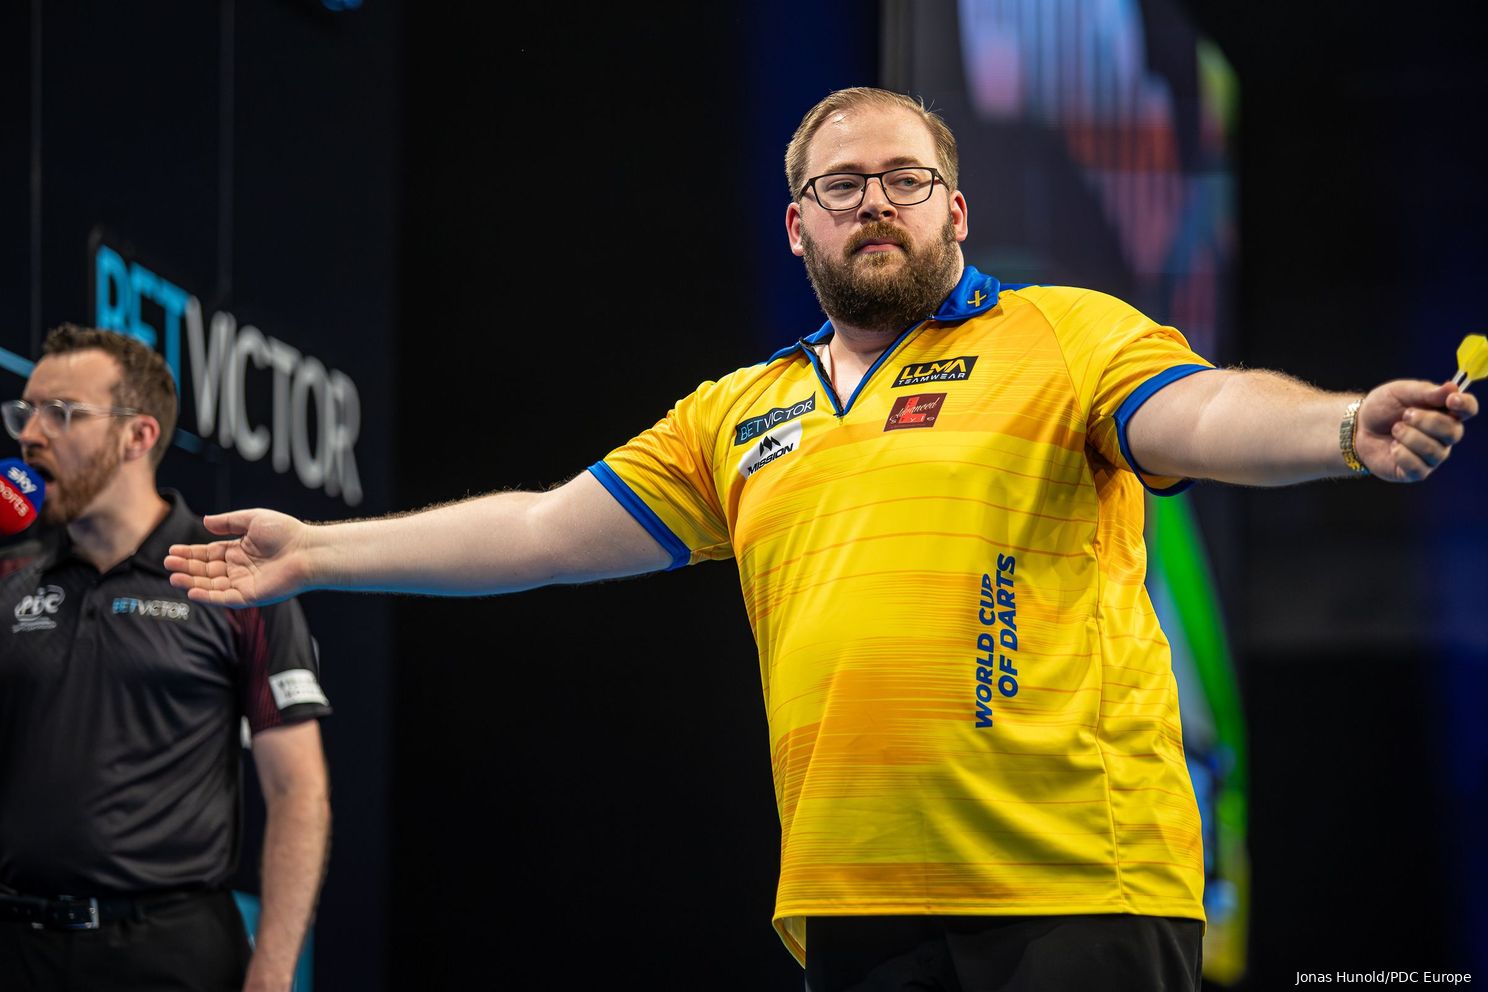 "I do feel extra pressure. Especially because I'm not originally from Sweden" - Jeffrey De Graaf hoping not to let his adopted nation down at World Cup of Darts